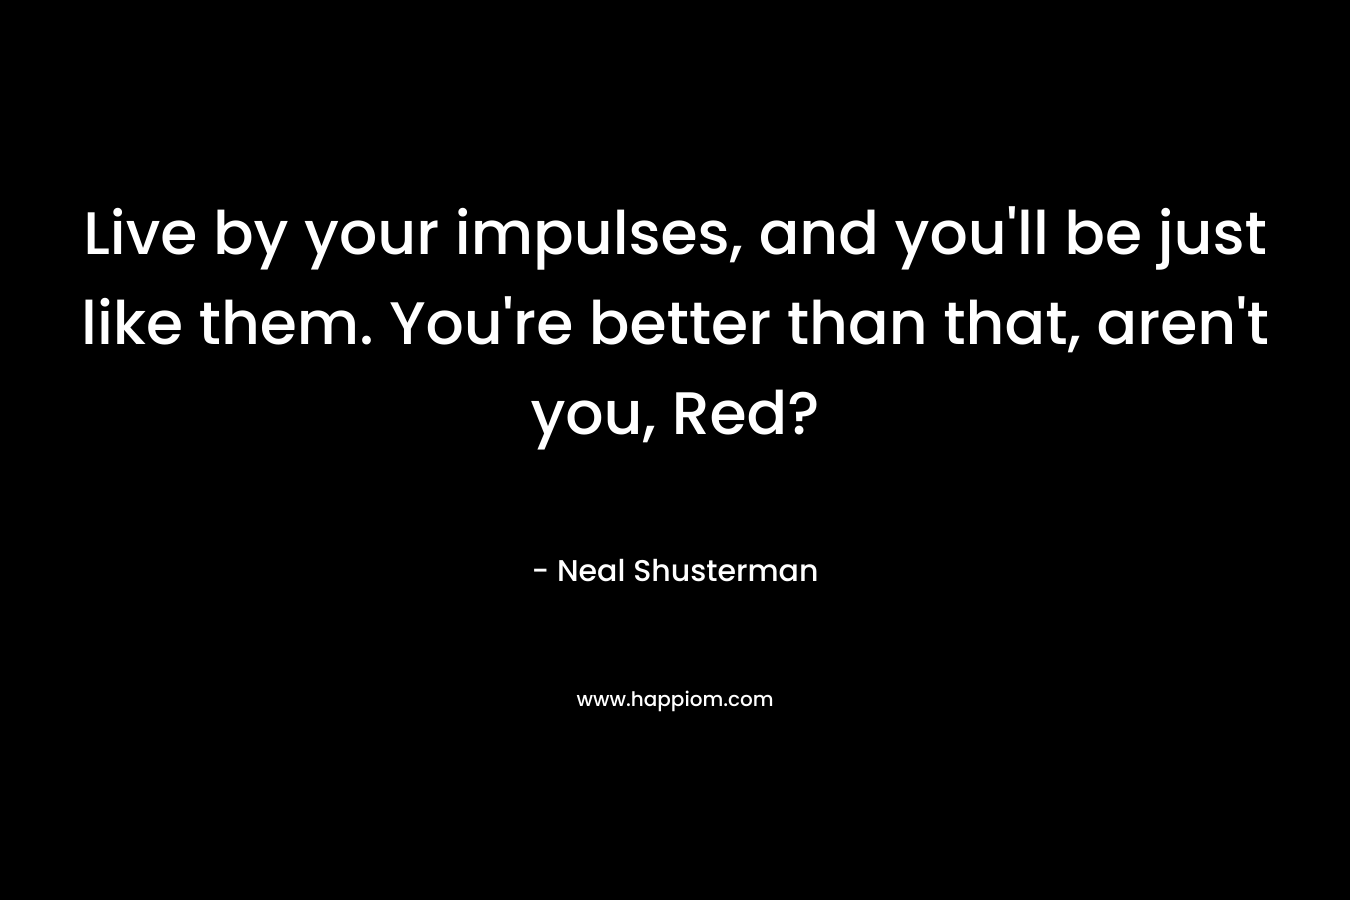 Live by your impulses, and you’ll be just like them. You’re better than that, aren’t you, Red? – Neal Shusterman